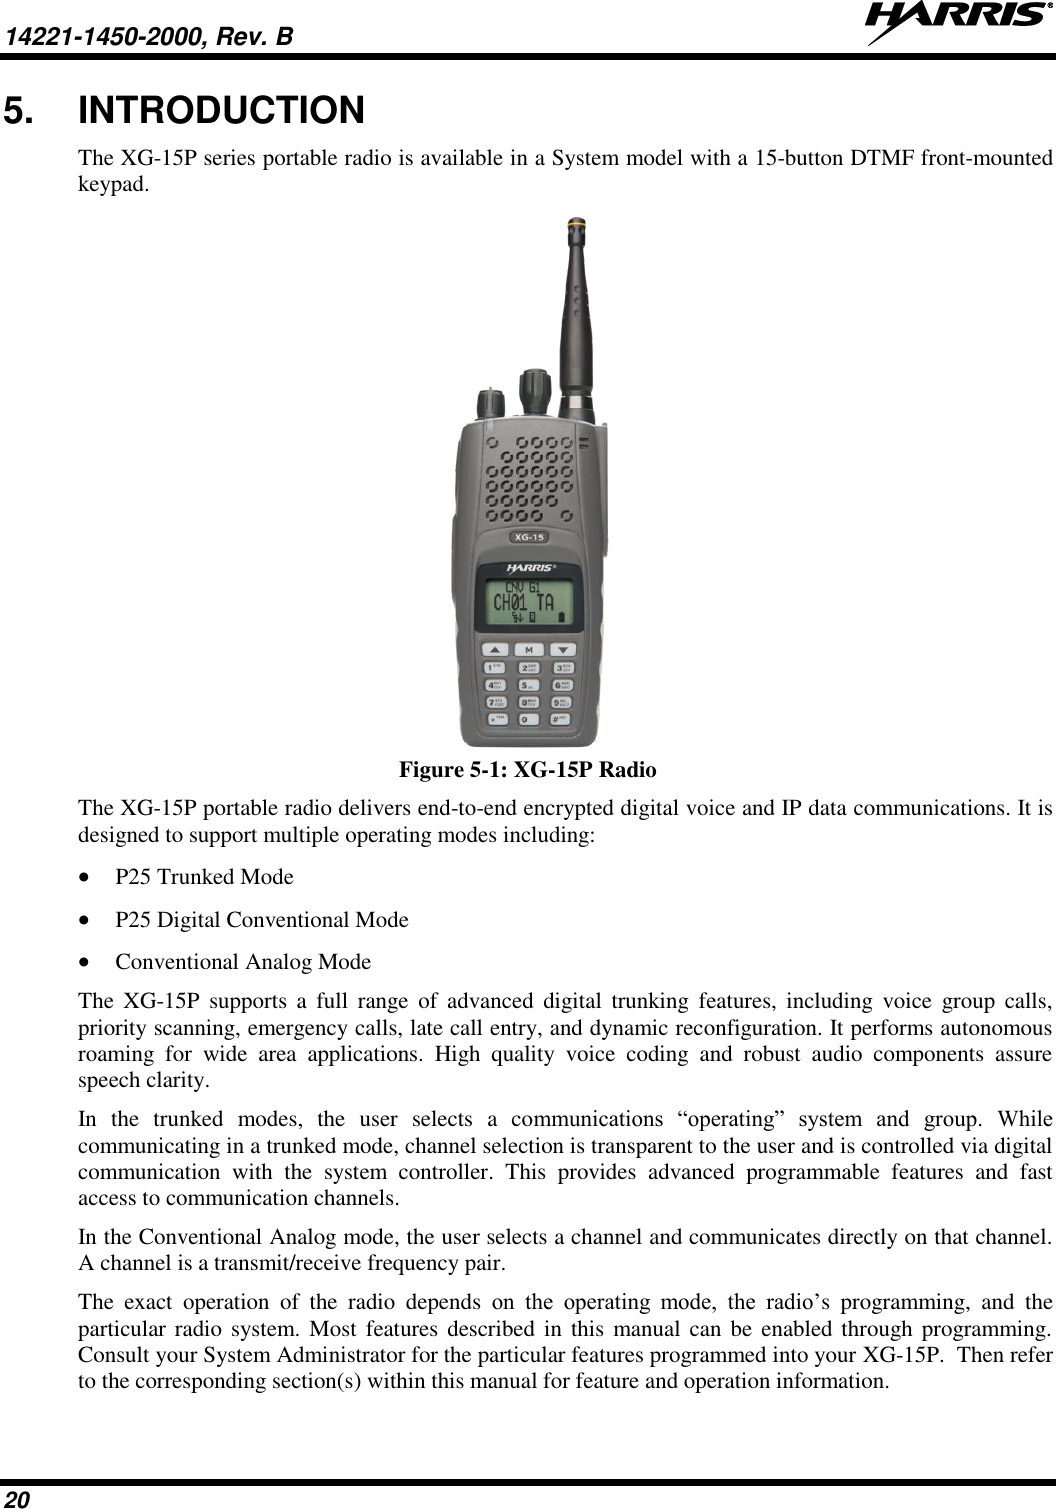 14221-1450-2000, Rev. B   20 5.  INTRODUCTION The XG-15P series portable radio is available in a System model with a 15-button DTMF front-mounted keypad.   Figure 5-1: XG-15P Radio The XG-15P portable radio delivers end-to-end encrypted digital voice and IP data communications. It is designed to support multiple operating modes including:  P25 Trunked Mode  P25 Digital Conventional Mode  Conventional Analog Mode The  XG-15P  supports  a  full  range  of  advanced  digital  trunking  features,  including  voice  group  calls, priority scanning, emergency calls, late call entry, and dynamic reconfiguration. It performs autonomous roaming  for  wide  area  applications.  High  quality  voice  coding  and  robust  audio  components  assure speech clarity. In  the  trunked  modes,  the  user  selects  a  communications  “operating”  system  and  group.  While communicating in a trunked mode, channel selection is transparent to the user and is controlled via digital communication  with  the  system  controller.  This  provides  advanced  programmable  features  and  fast access to communication channels. In the Conventional Analog mode, the user selects a channel and communicates directly on that channel. A channel is a transmit/receive frequency pair. The  exact  operation  of  the  radio  depends  on  the  operating  mode,  the  radio’s  programming,  and  the particular radio system. Most features described in  this manual can be  enabled through programming. Consult your System Administrator for the particular features programmed into your XG-15P.  Then refer to the corresponding section(s) within this manual for feature and operation information. 